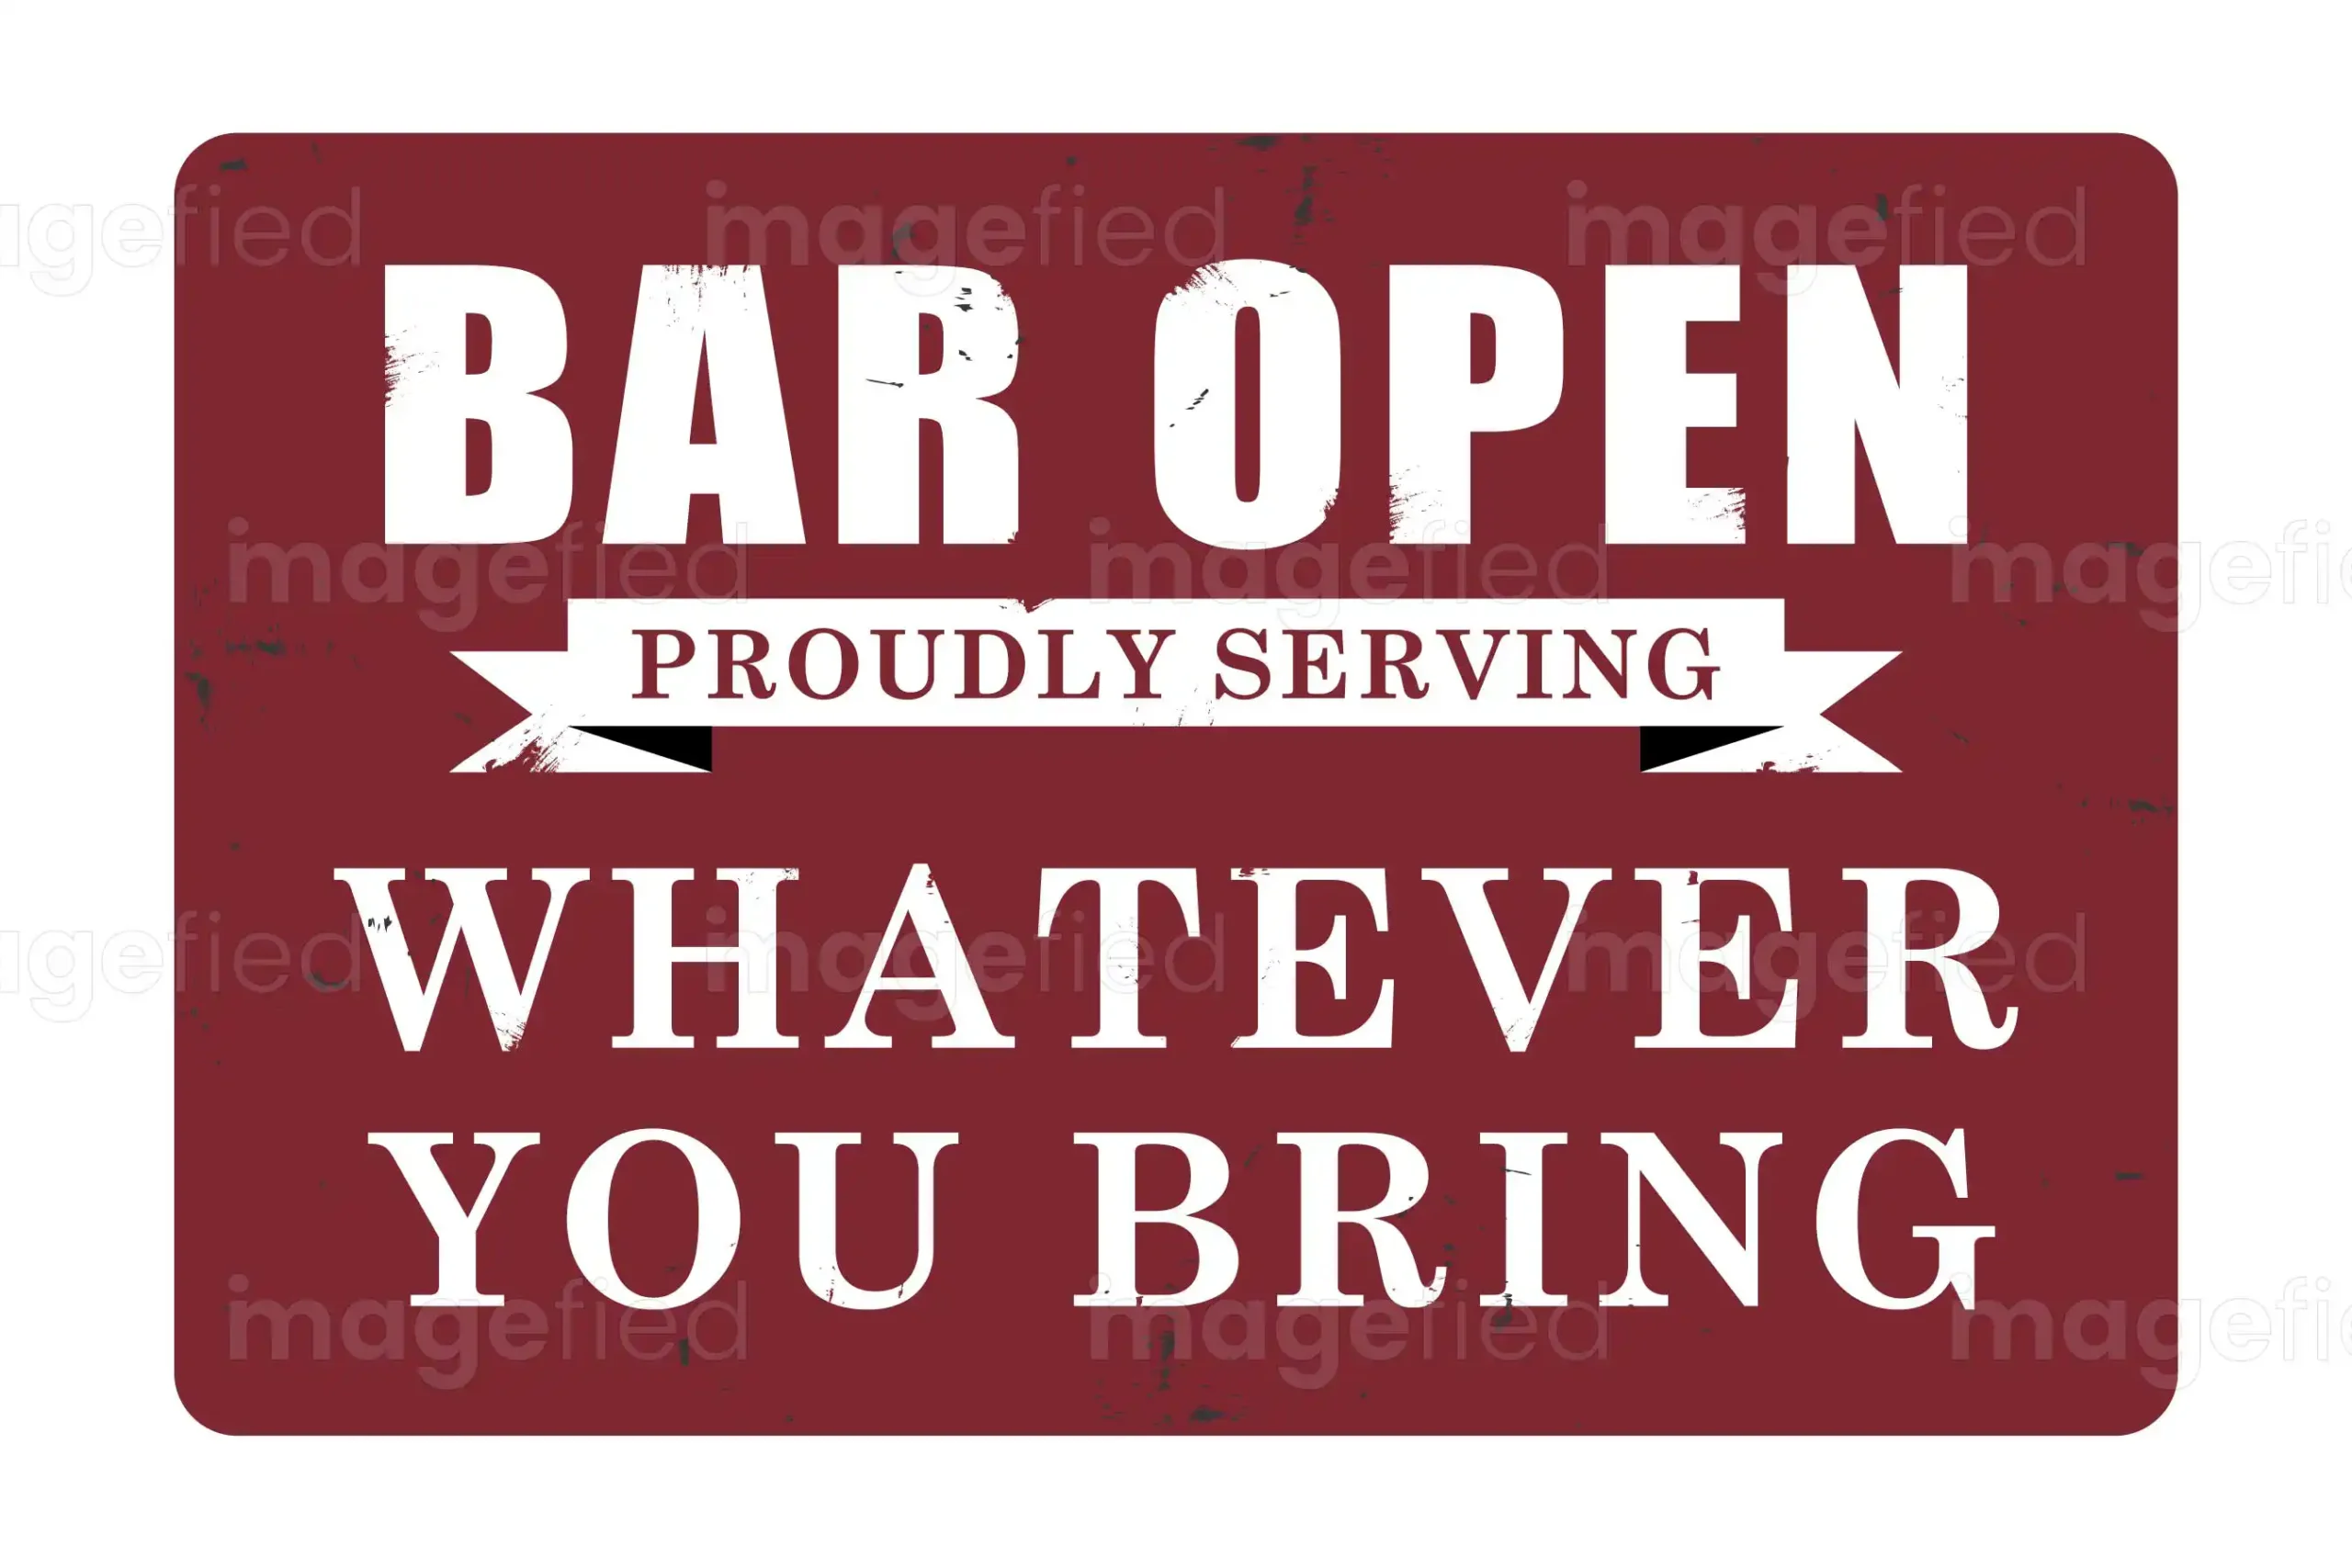 Bar Open Proudly Serving Whatever You Bring Sign, Sticker, Stock Vectors